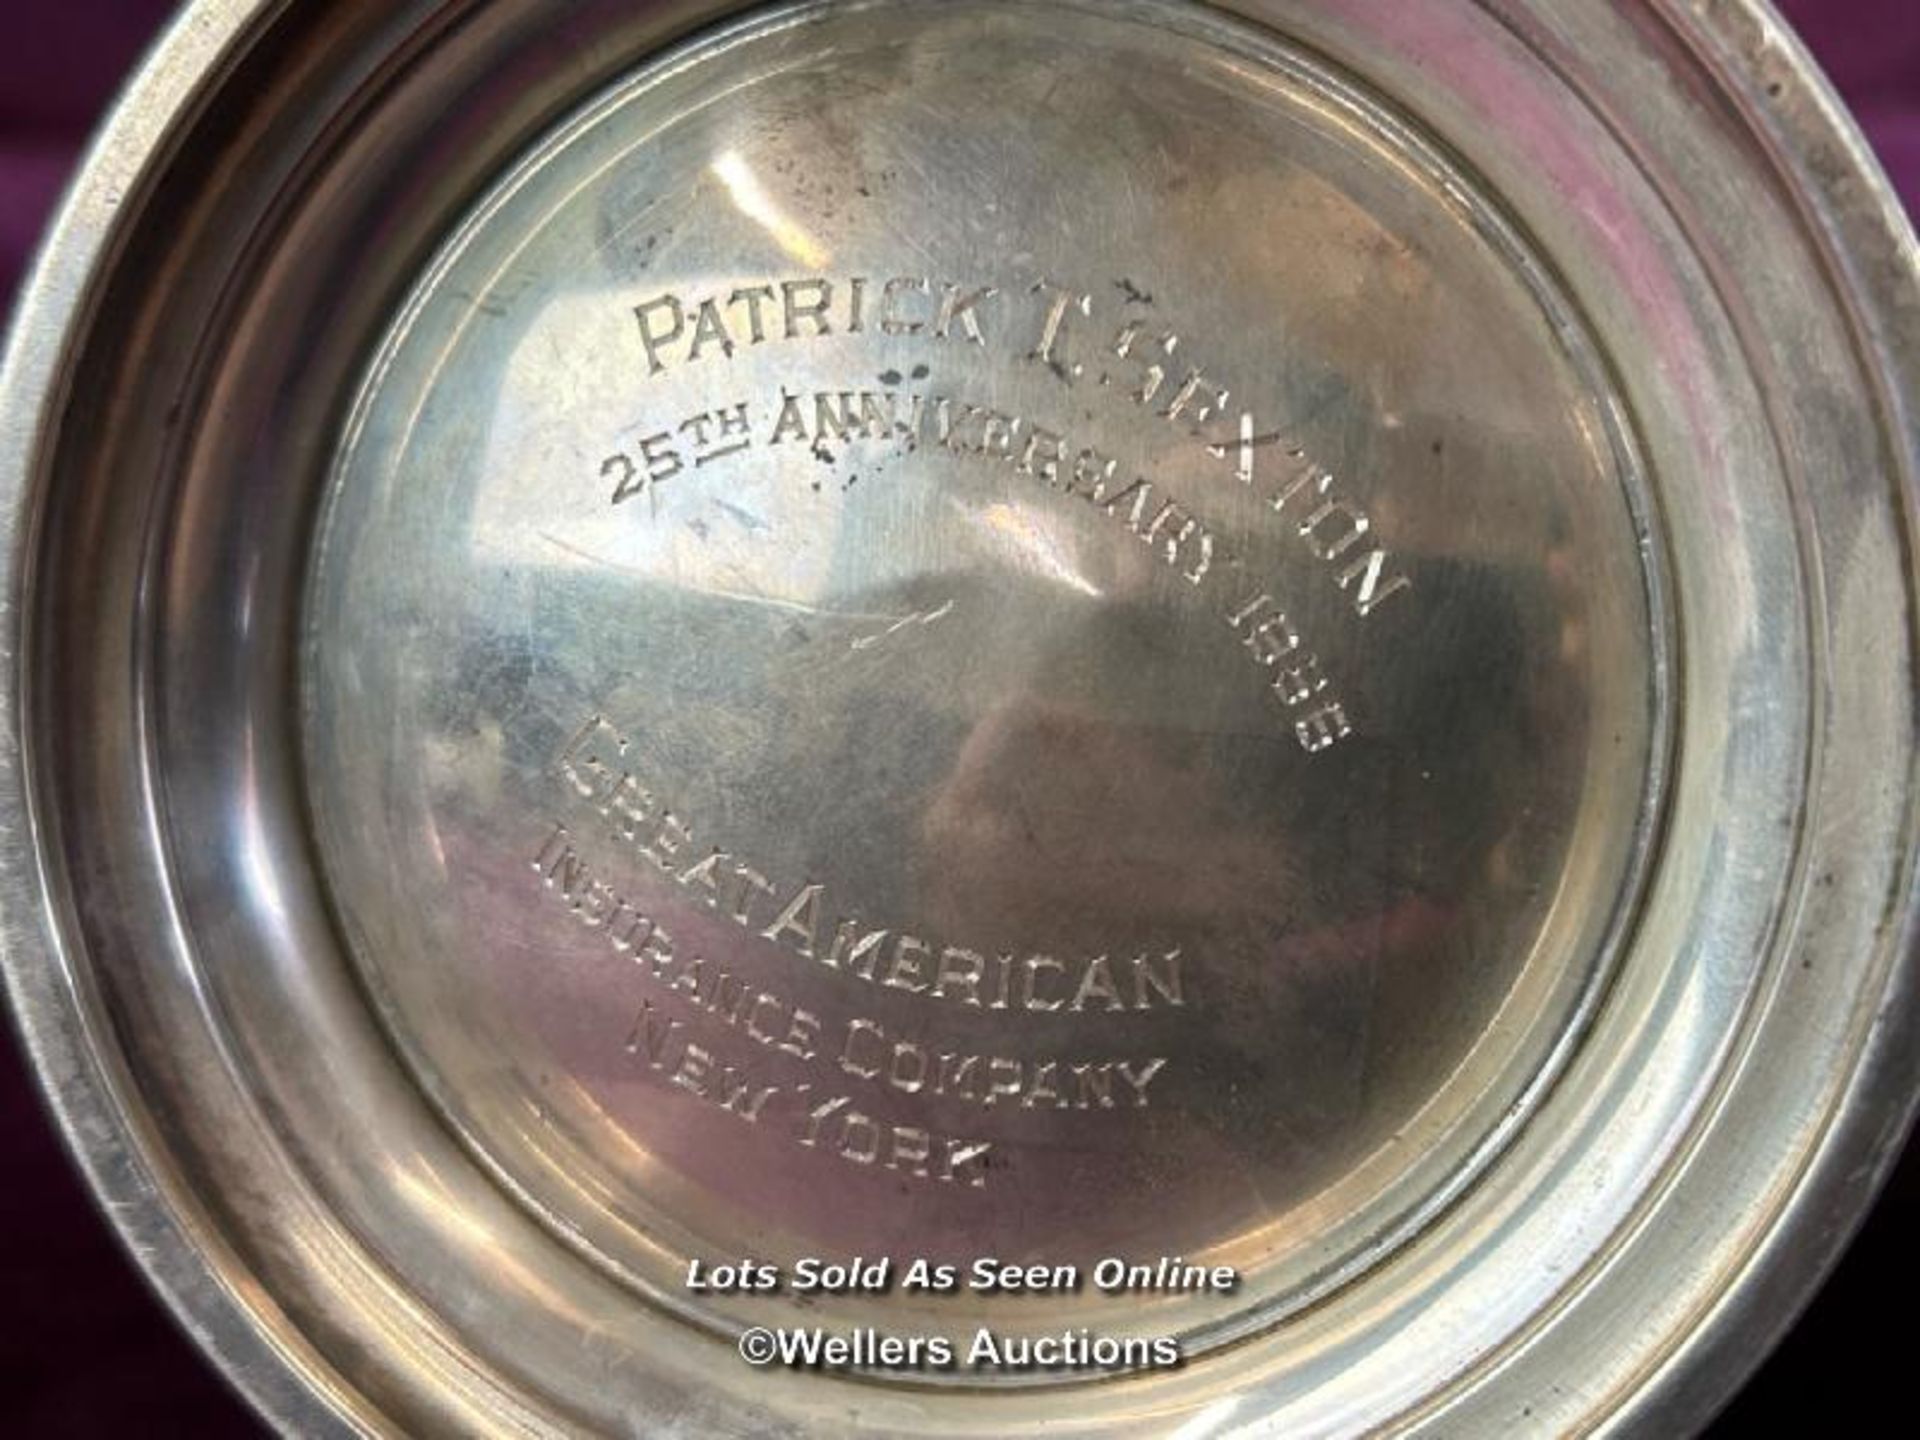 A PRESENTATION SILVER PLATED WATER JUG, ENGRAVED 'PATRICK T. SEXTON, 25TH ANNIVERSARY 1956, GREAT - Image 3 of 3